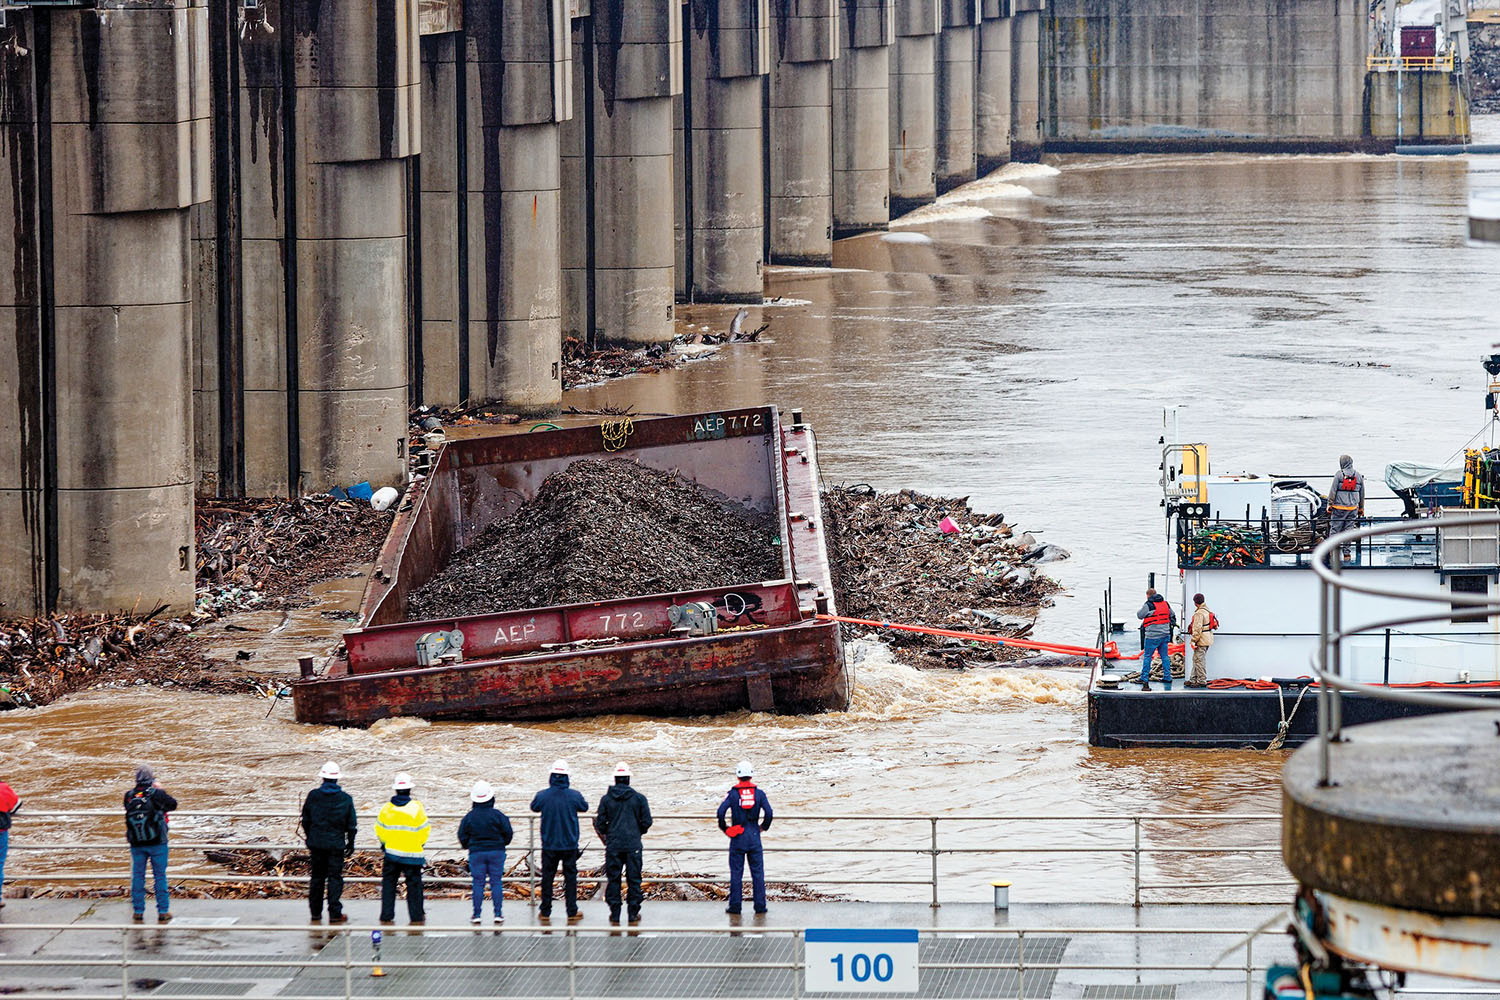 Crews aboard Campbell Transportation Company’s mv. Andrea S and mv. Marci Gale pulled the barge away from the piers at Markland Dam on the Ohio River. (photo by Justin Carlisle)